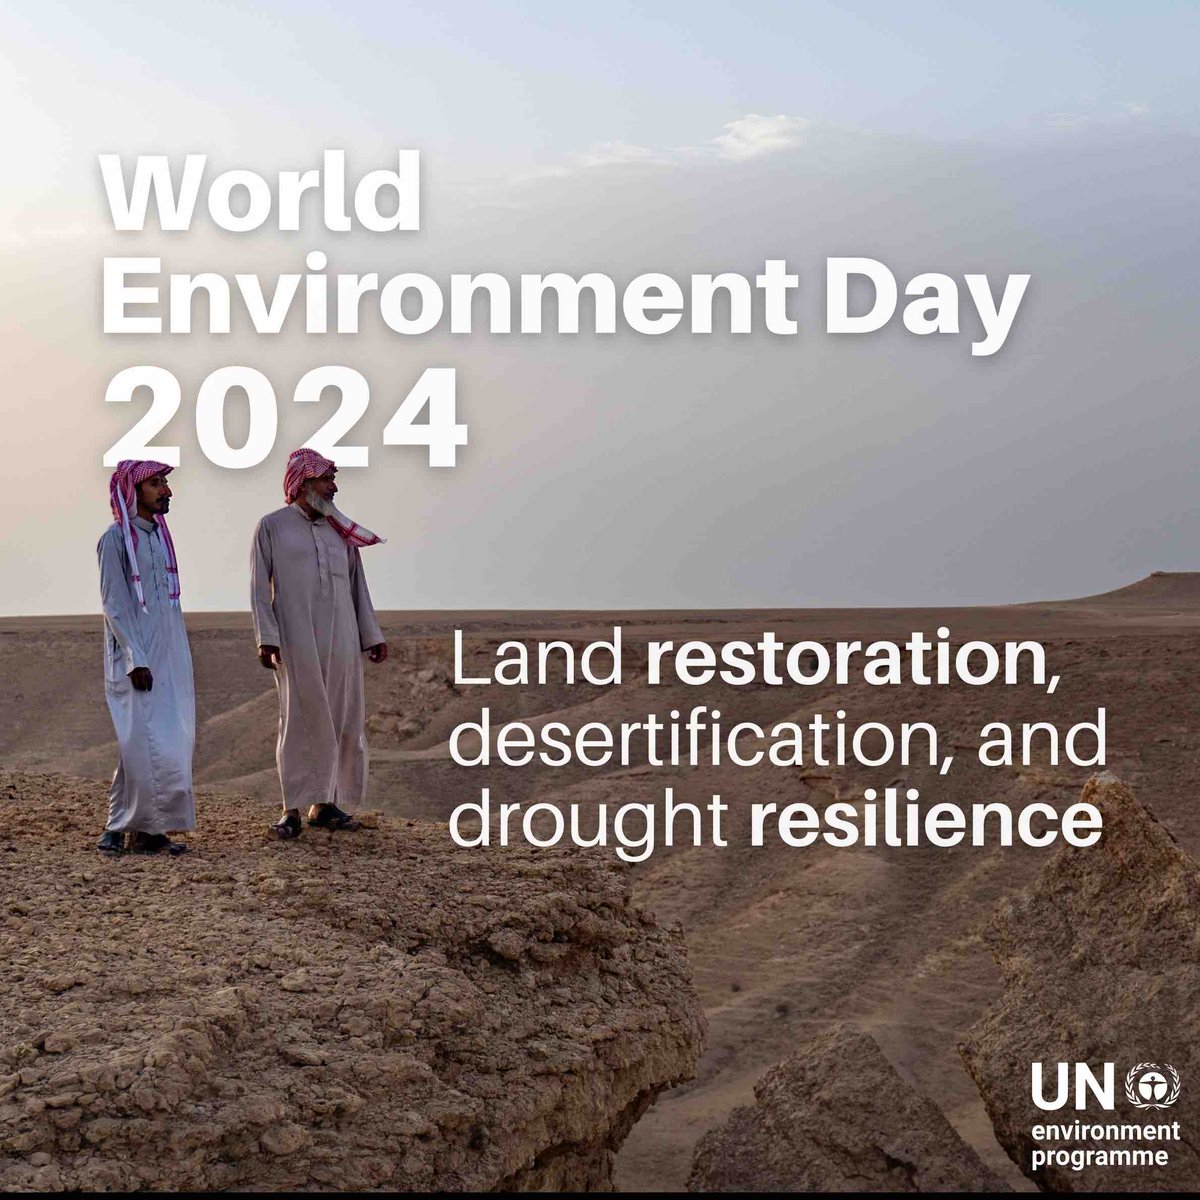 World Environment Day in 2024 is will focus on land restoration, desertification and drought resilience. Register your event here to join one of the largest global platforms for environmental outreach on 5 June: worldenvironmentday.global